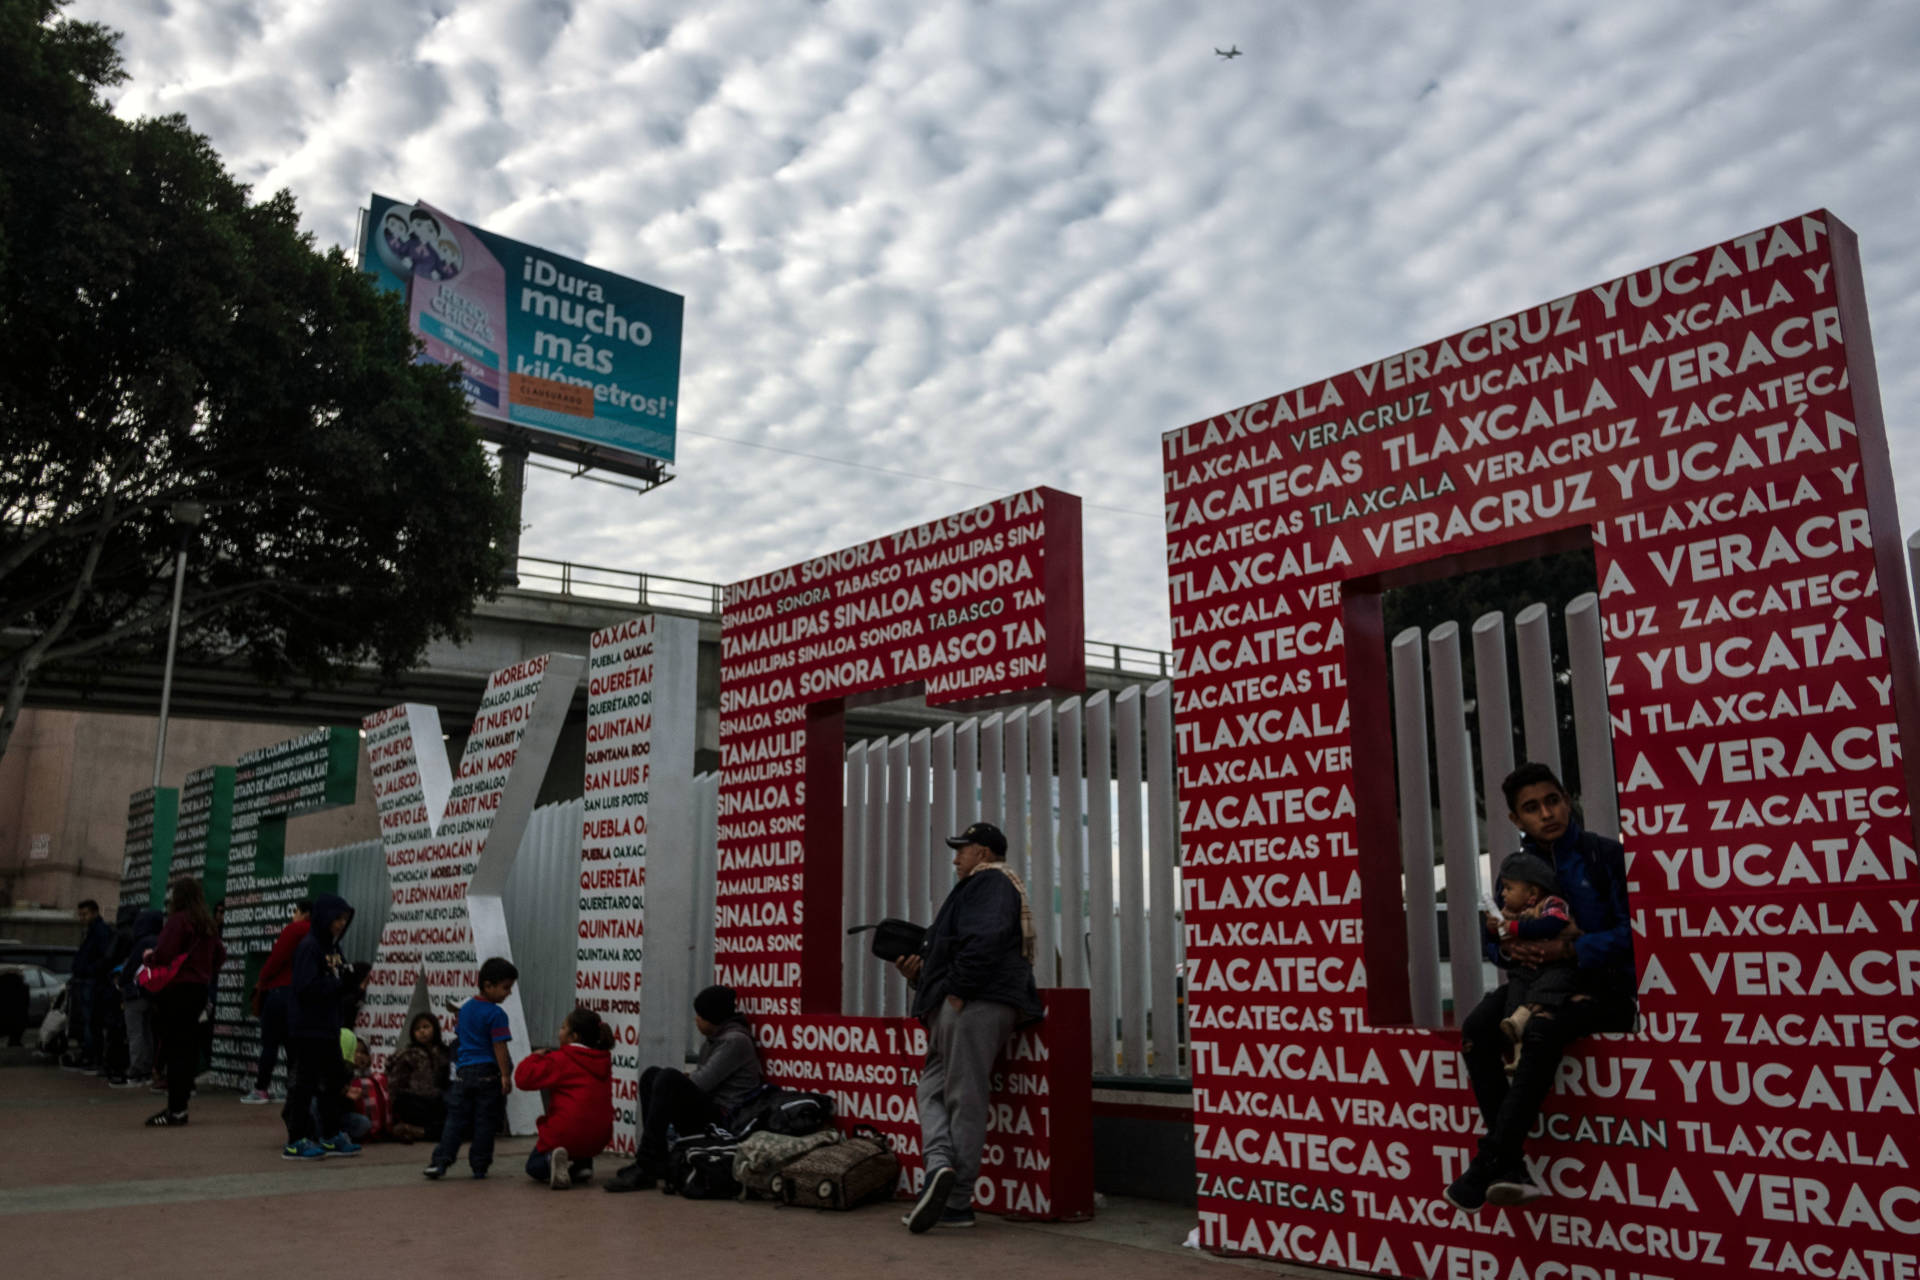 Asylum seekers wait at El Chaparral crossing port at the US-Mexico border, in Tijuana, Baja California state, Mexico, on January 29, 2019. GUILLERMO ARIAS/AFP/Getty Images